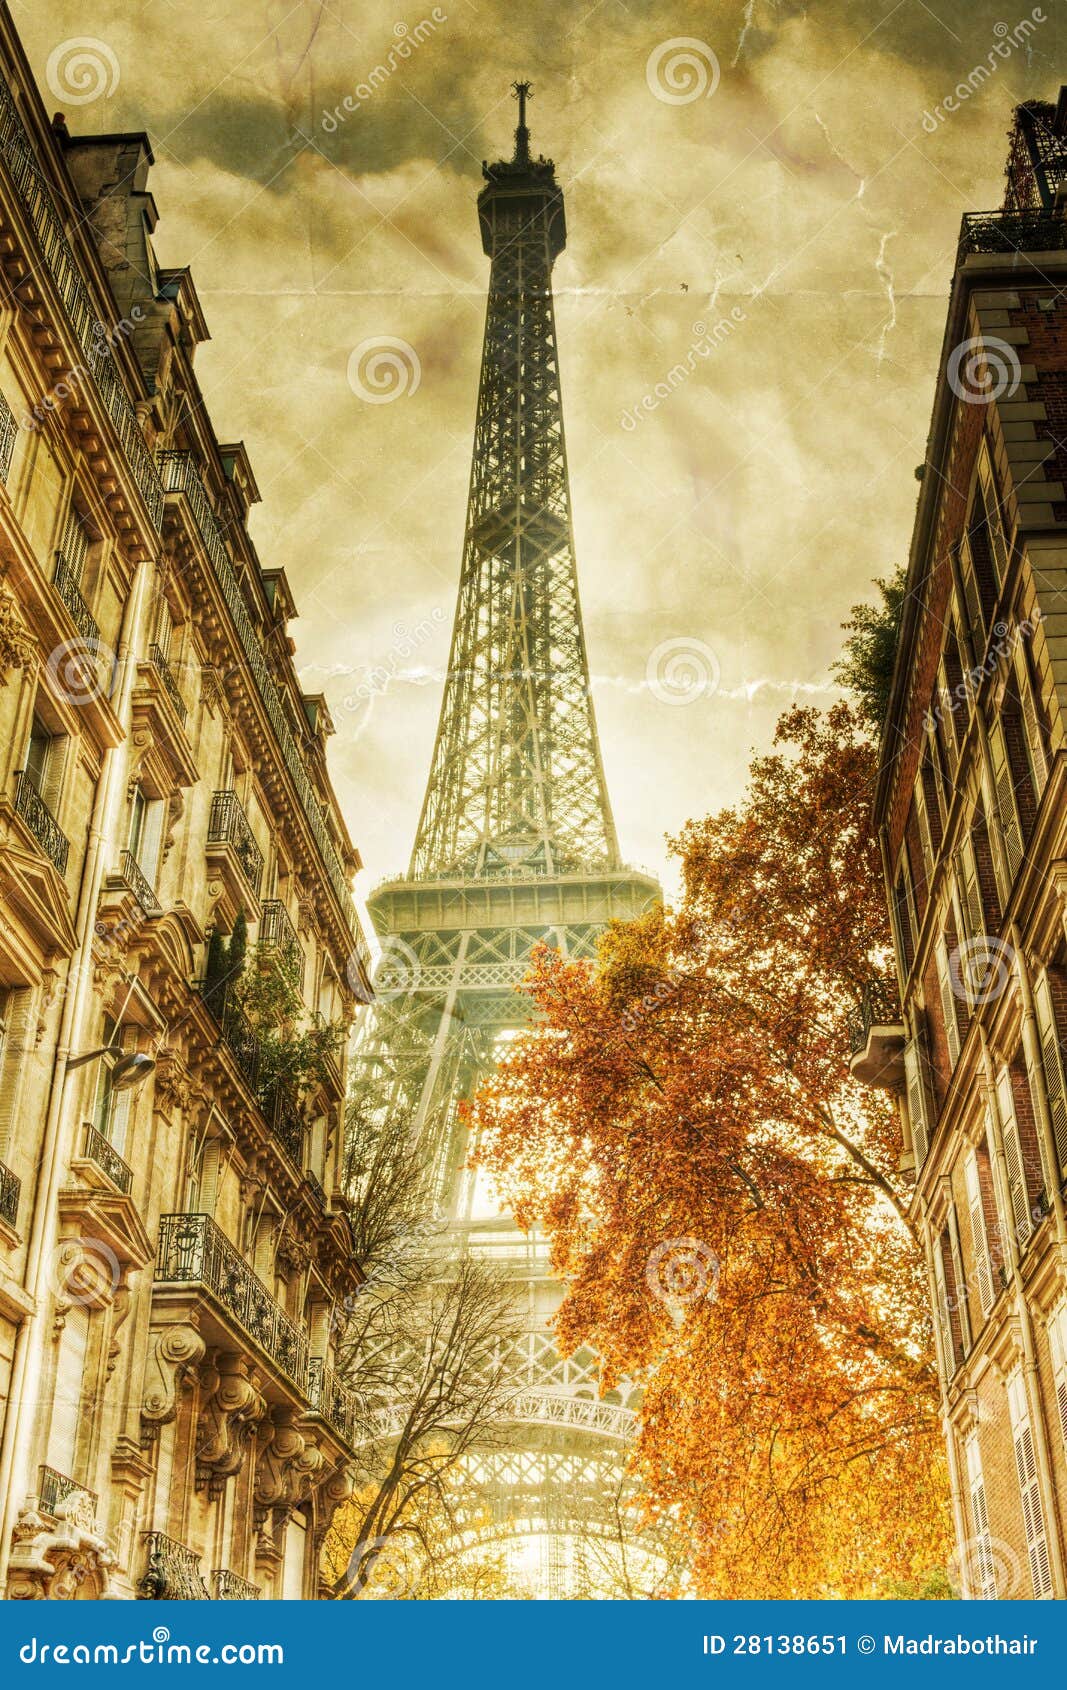 Eiffel Tower On Old Paper Texture Stock Image - Image: 28138651